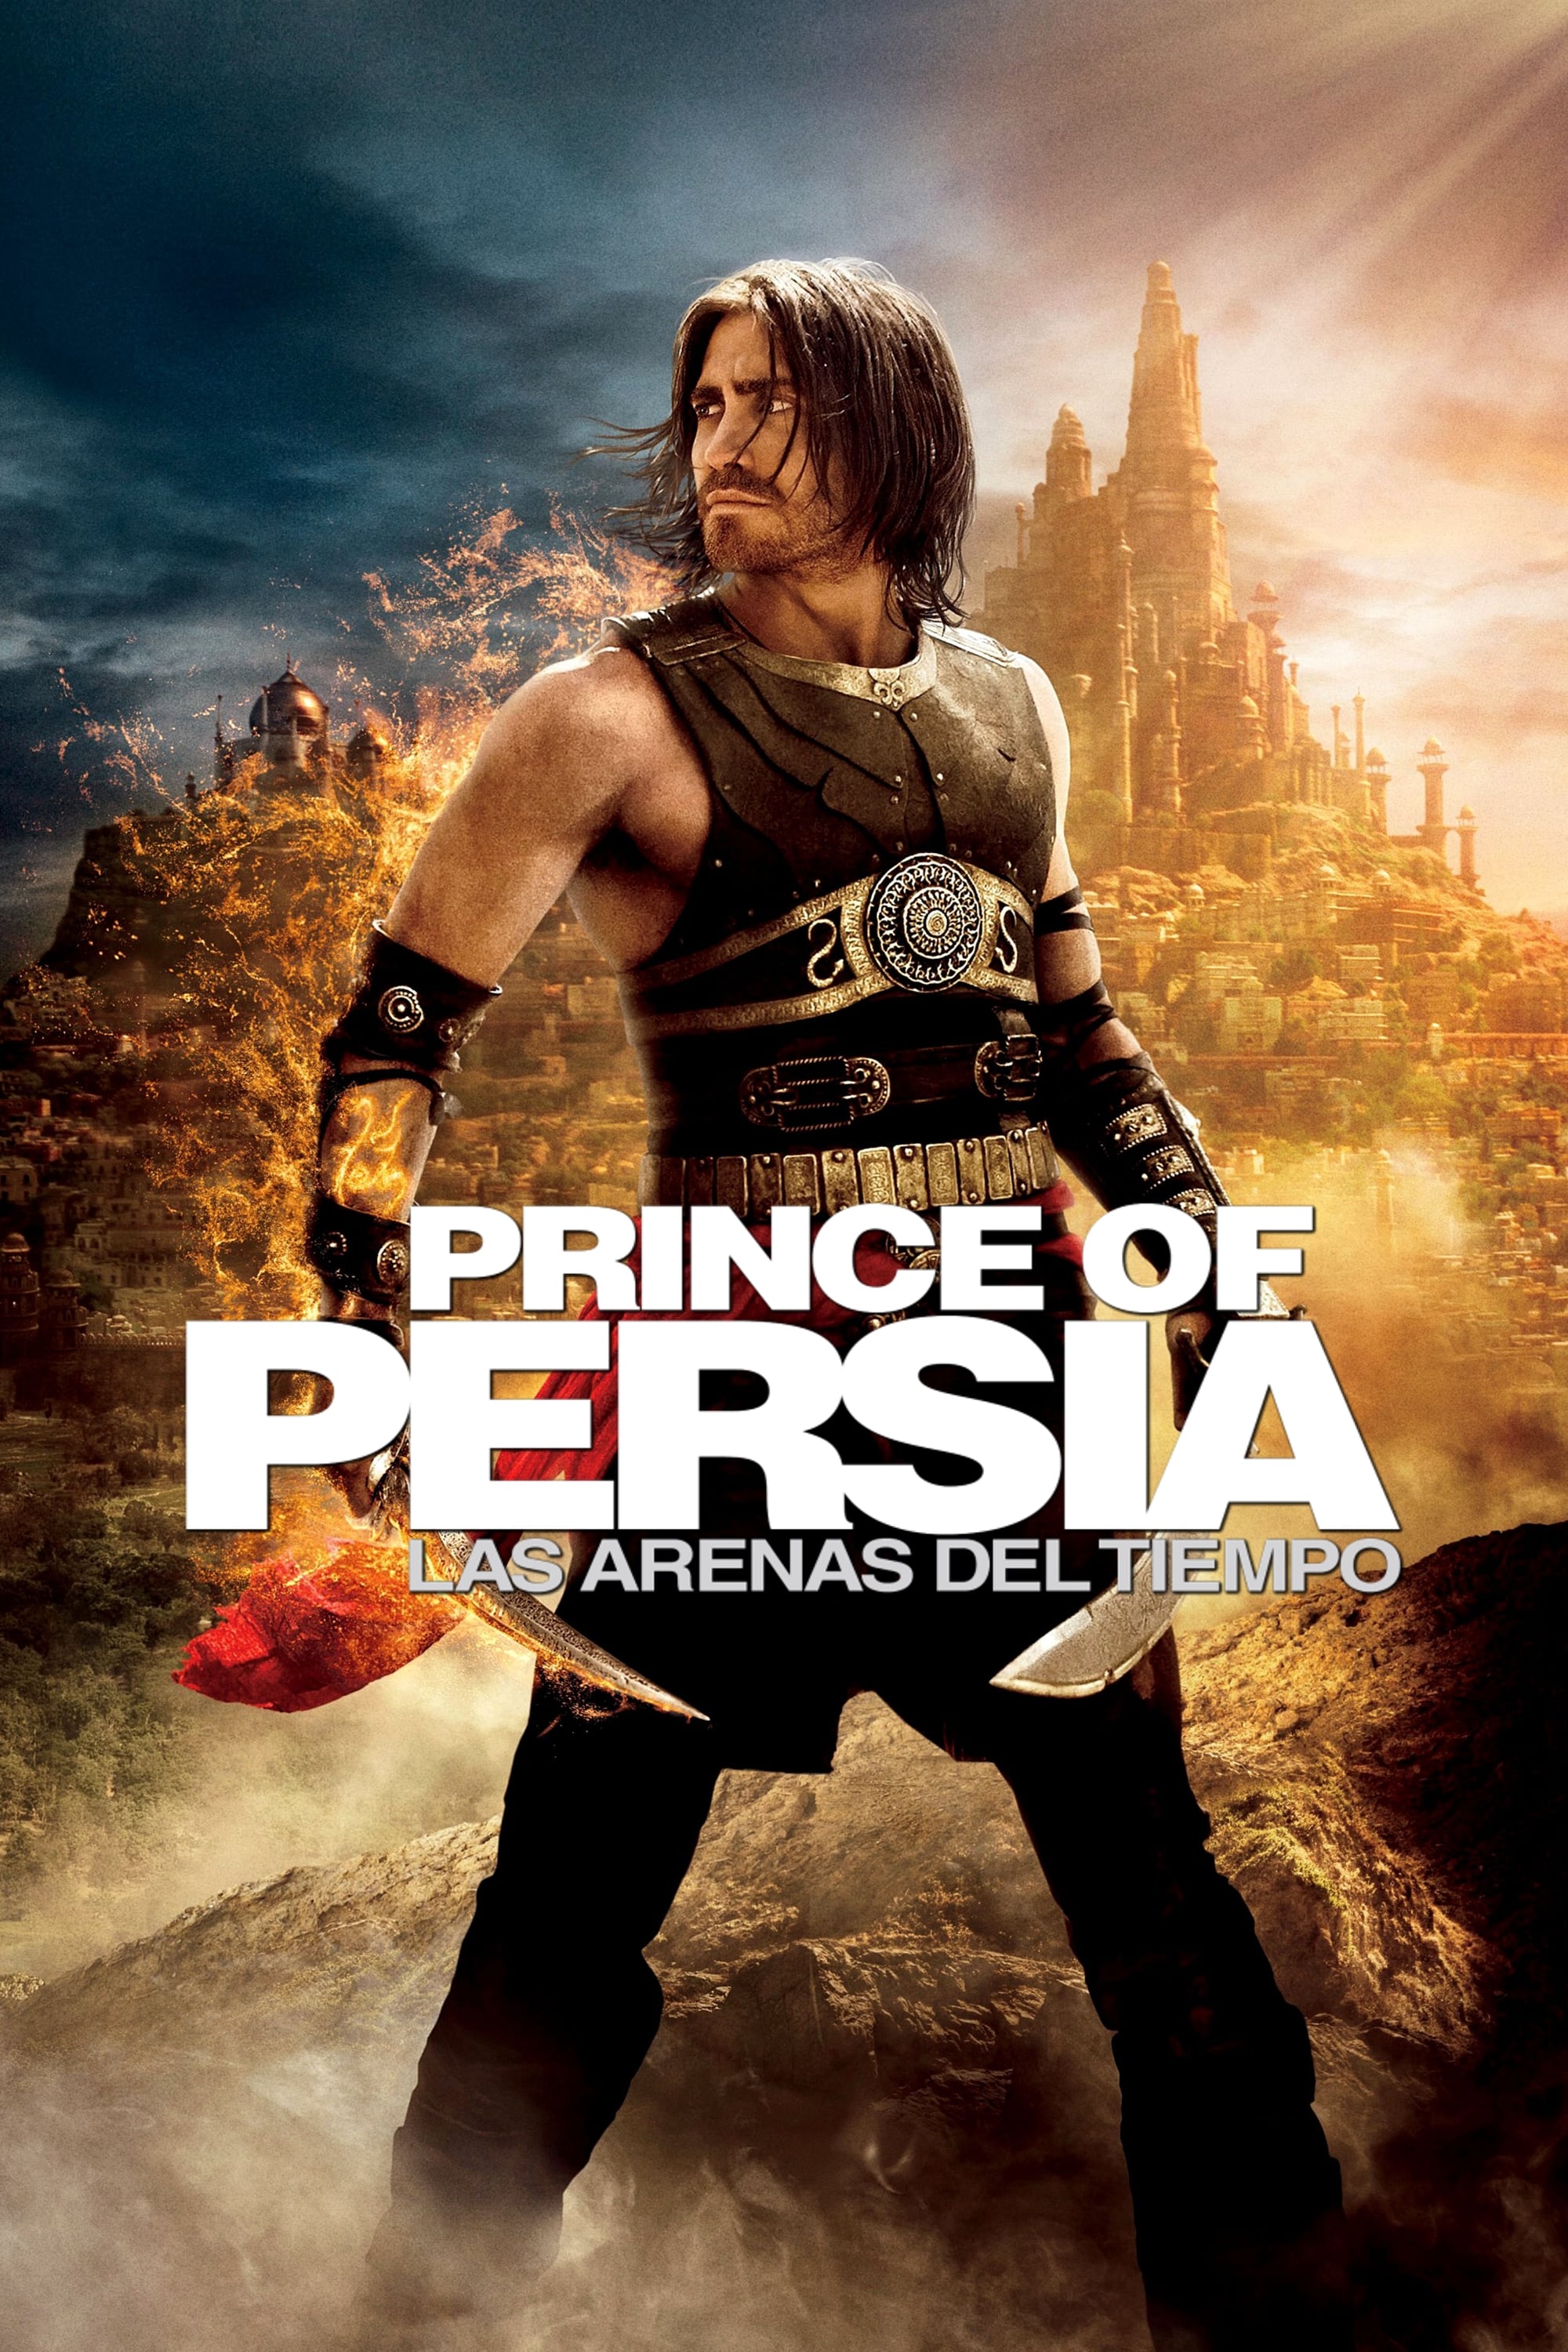 Download Prince Of Persia.The Sands Of Time (2010) BRRip 864p Dual